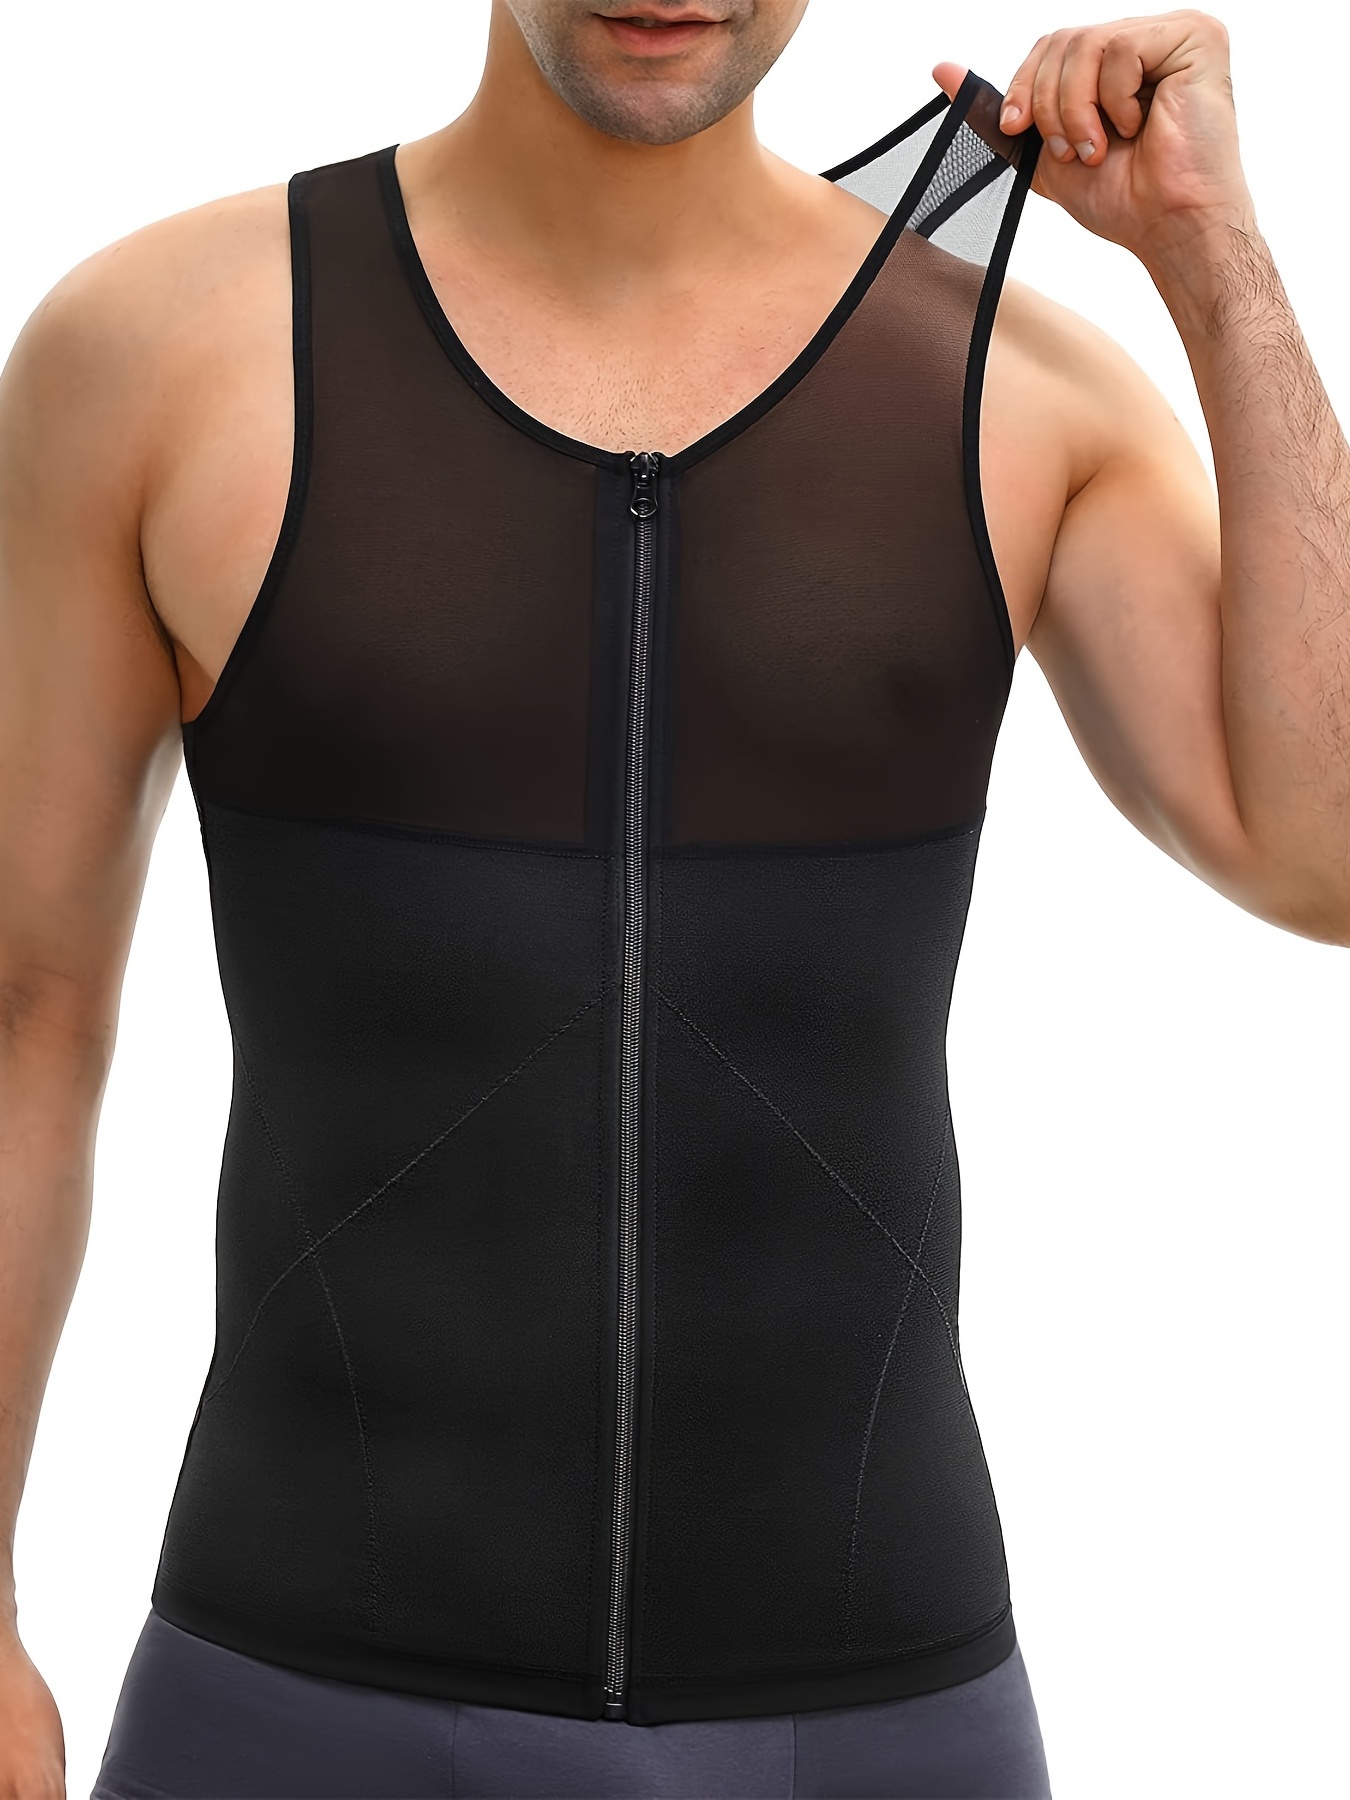 2023 New Version Ionic Shaping Sleeveless Shirt, Ion Shaping Vest, Guys Men  Compression Top, Body Shaper Slimming Vest